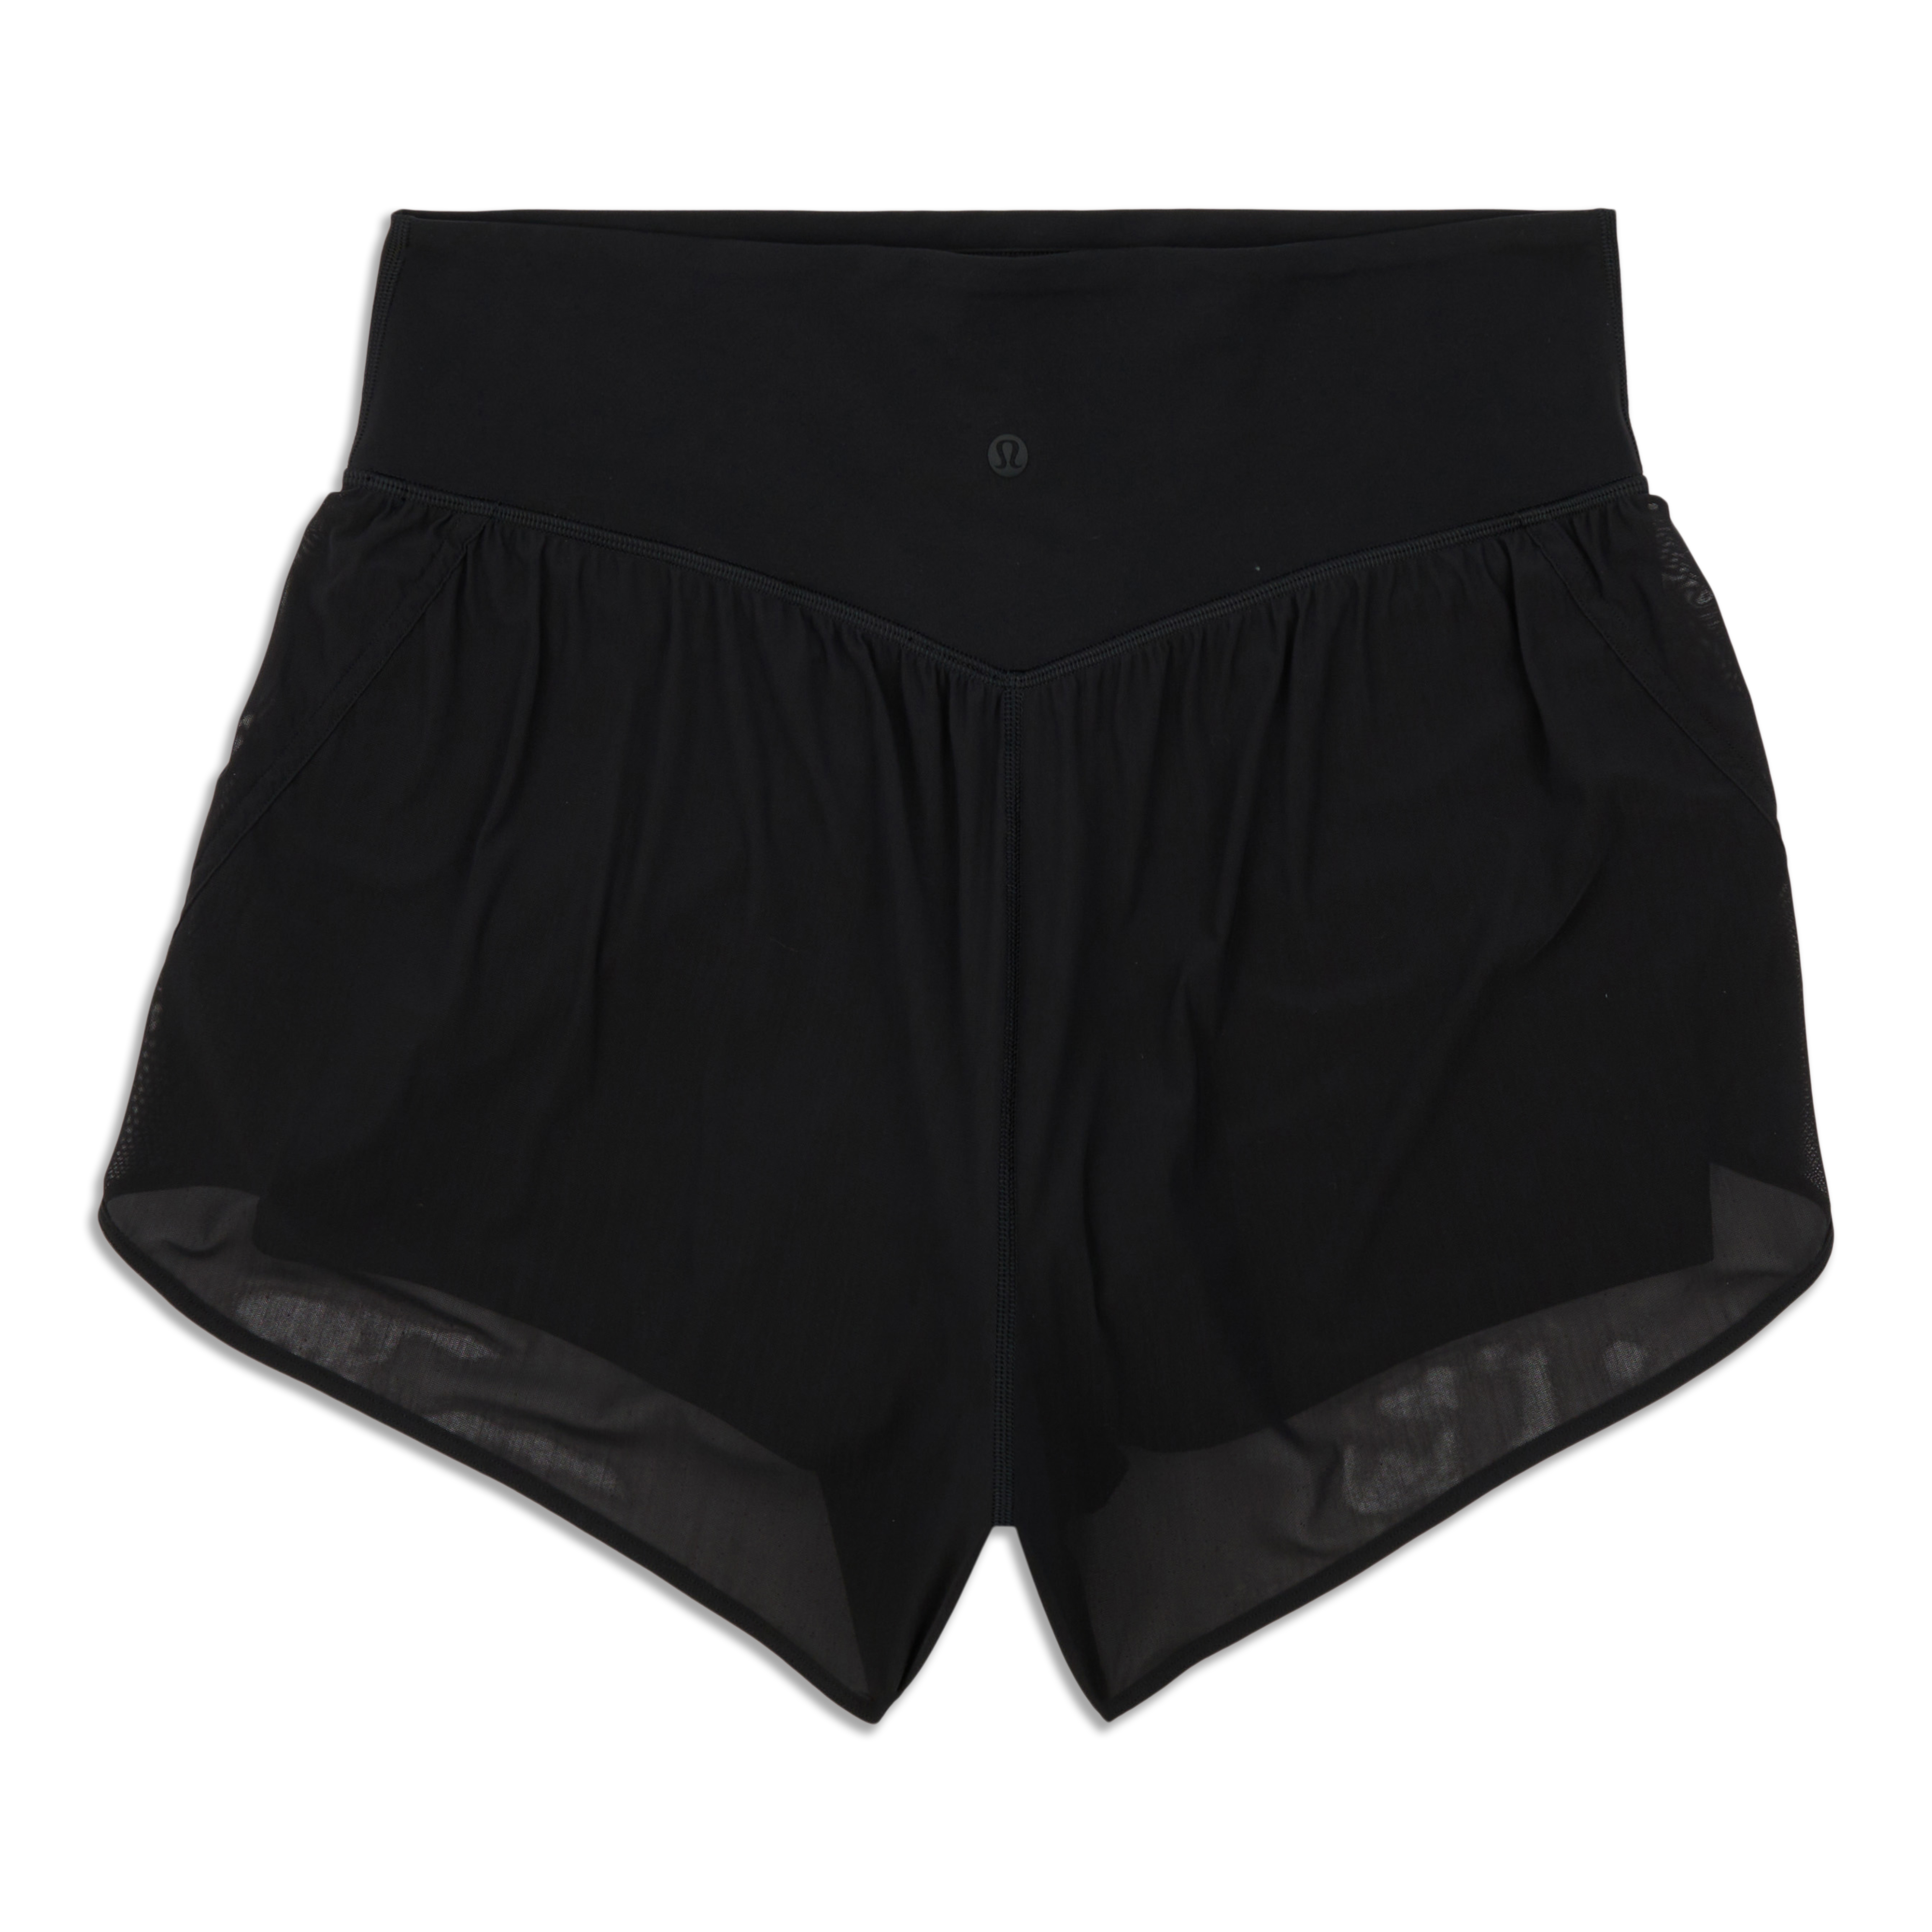 Lululemon Ribbed Contoured Shorts Black Size 12 - $65 New With Tags - From  Raquel